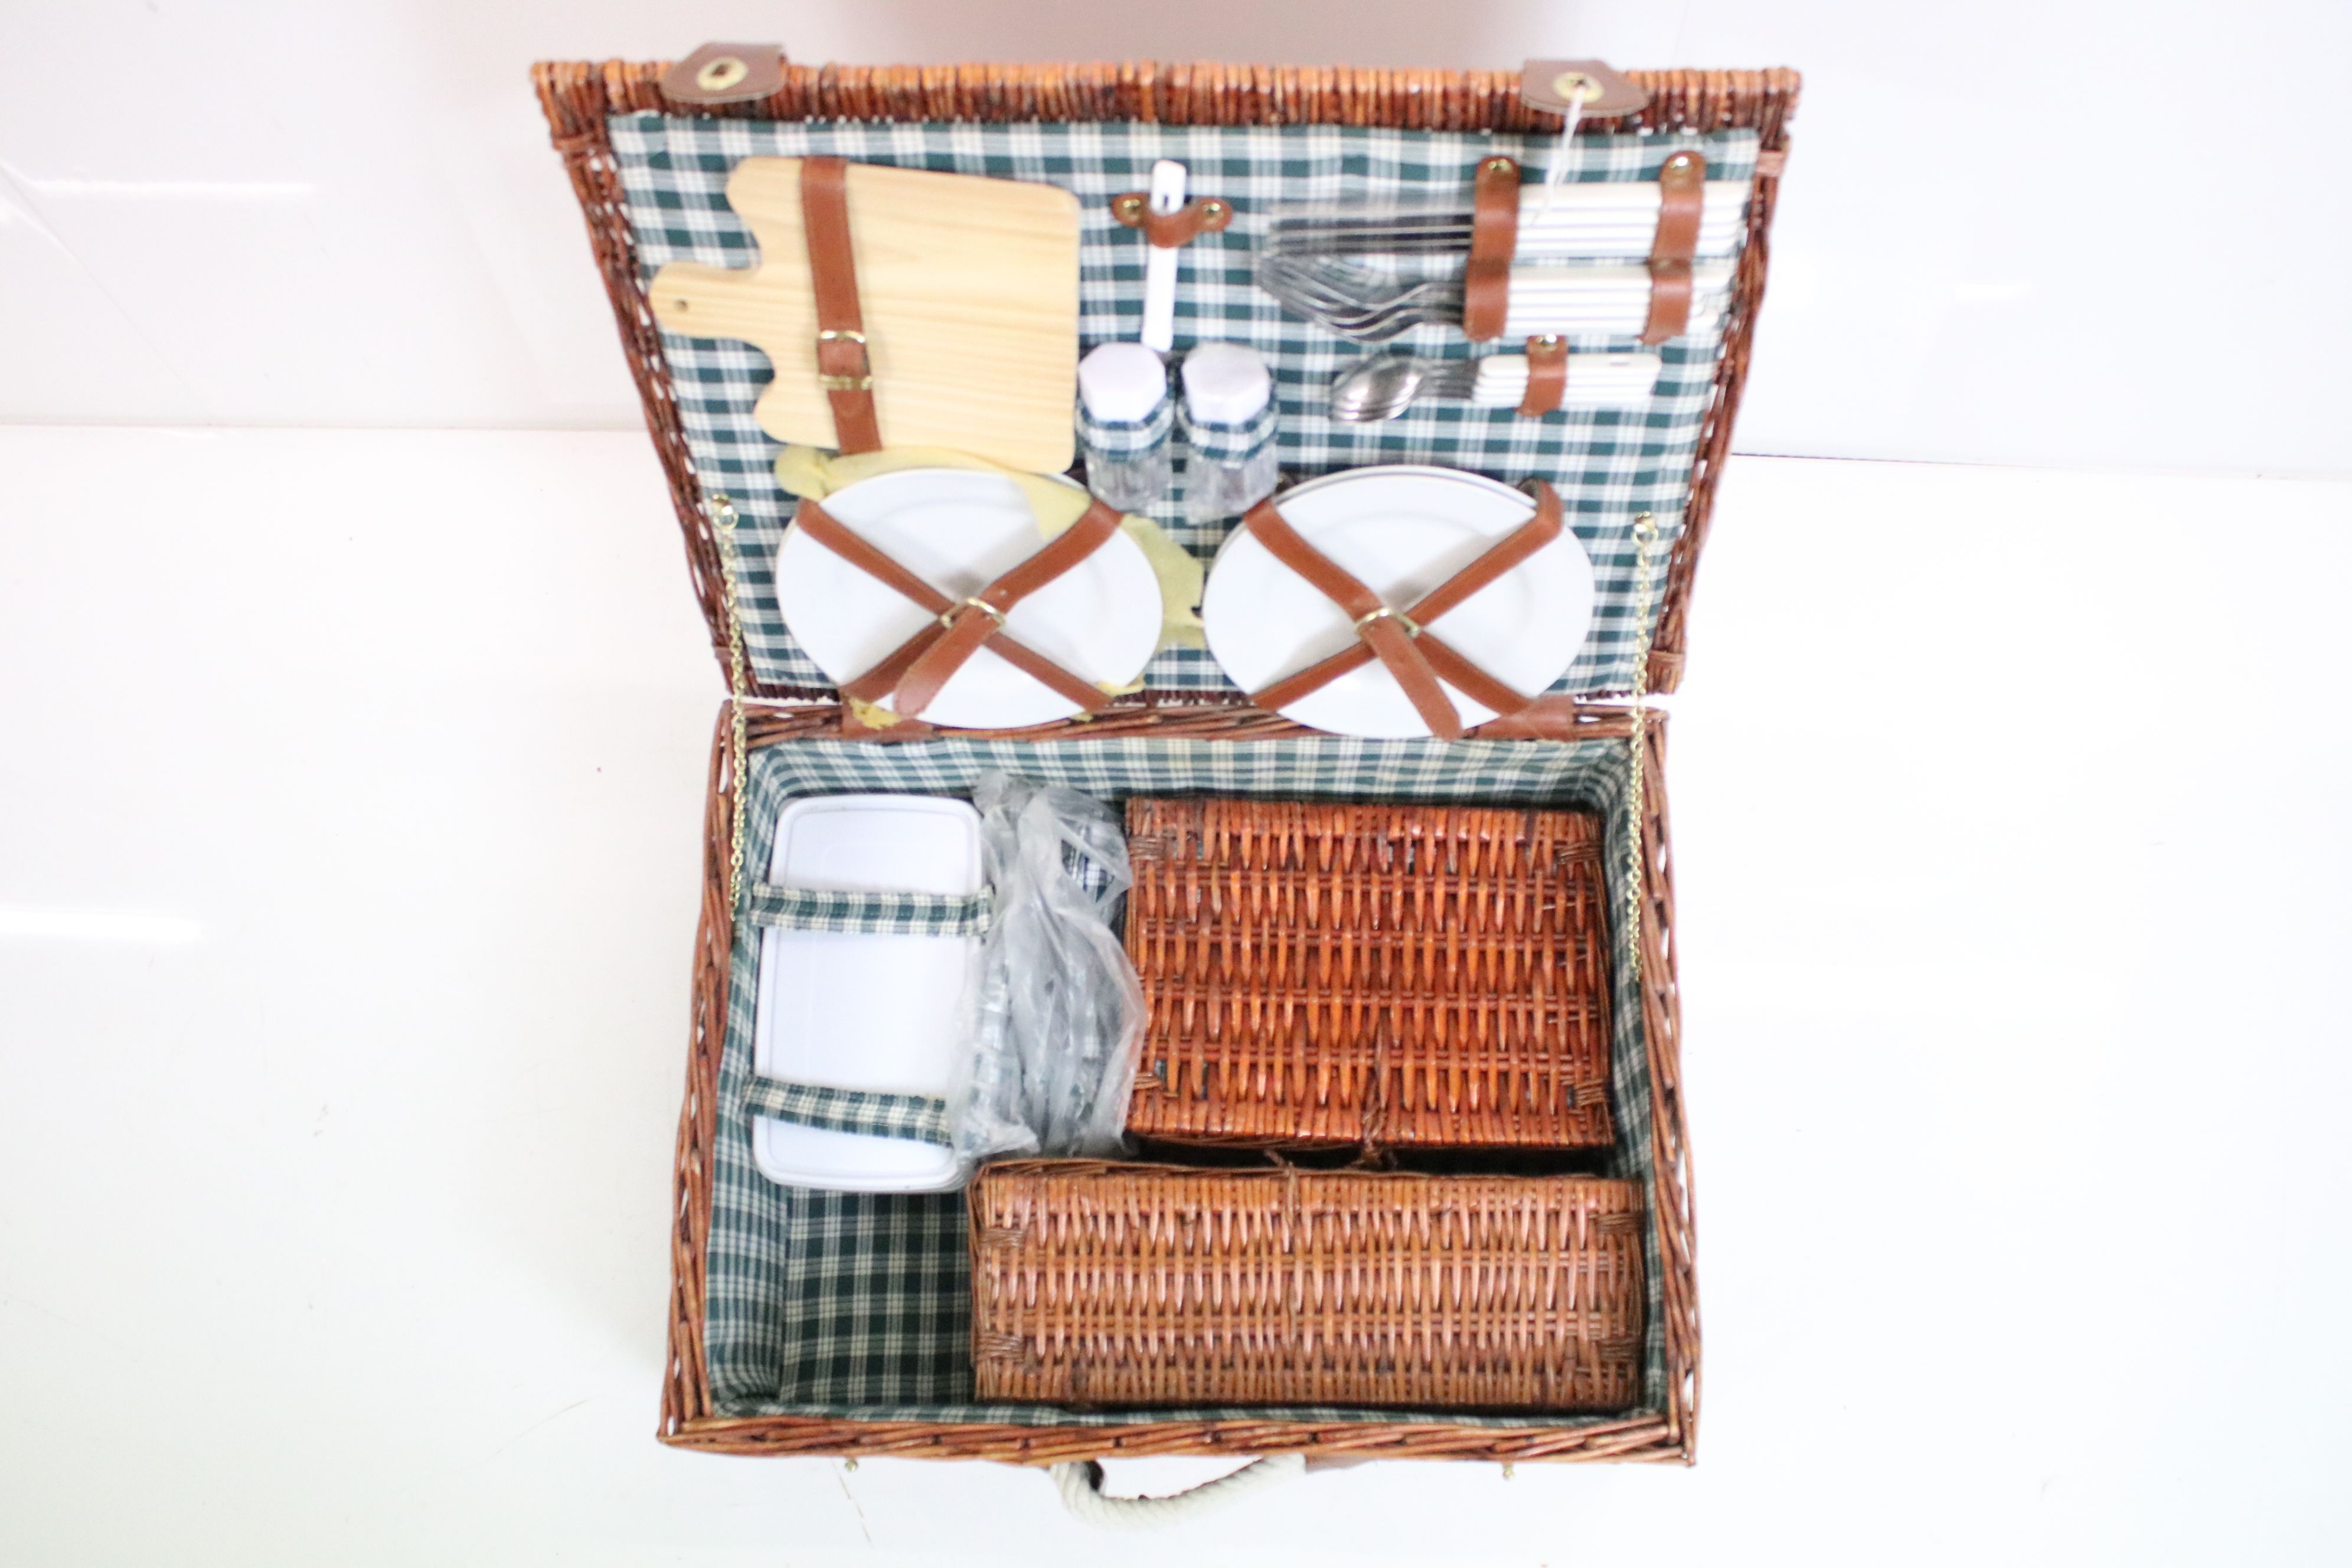 Four person picnic set in three wicker baskets, comprising cutlery, mugs, champagne glasses, - Image 2 of 7